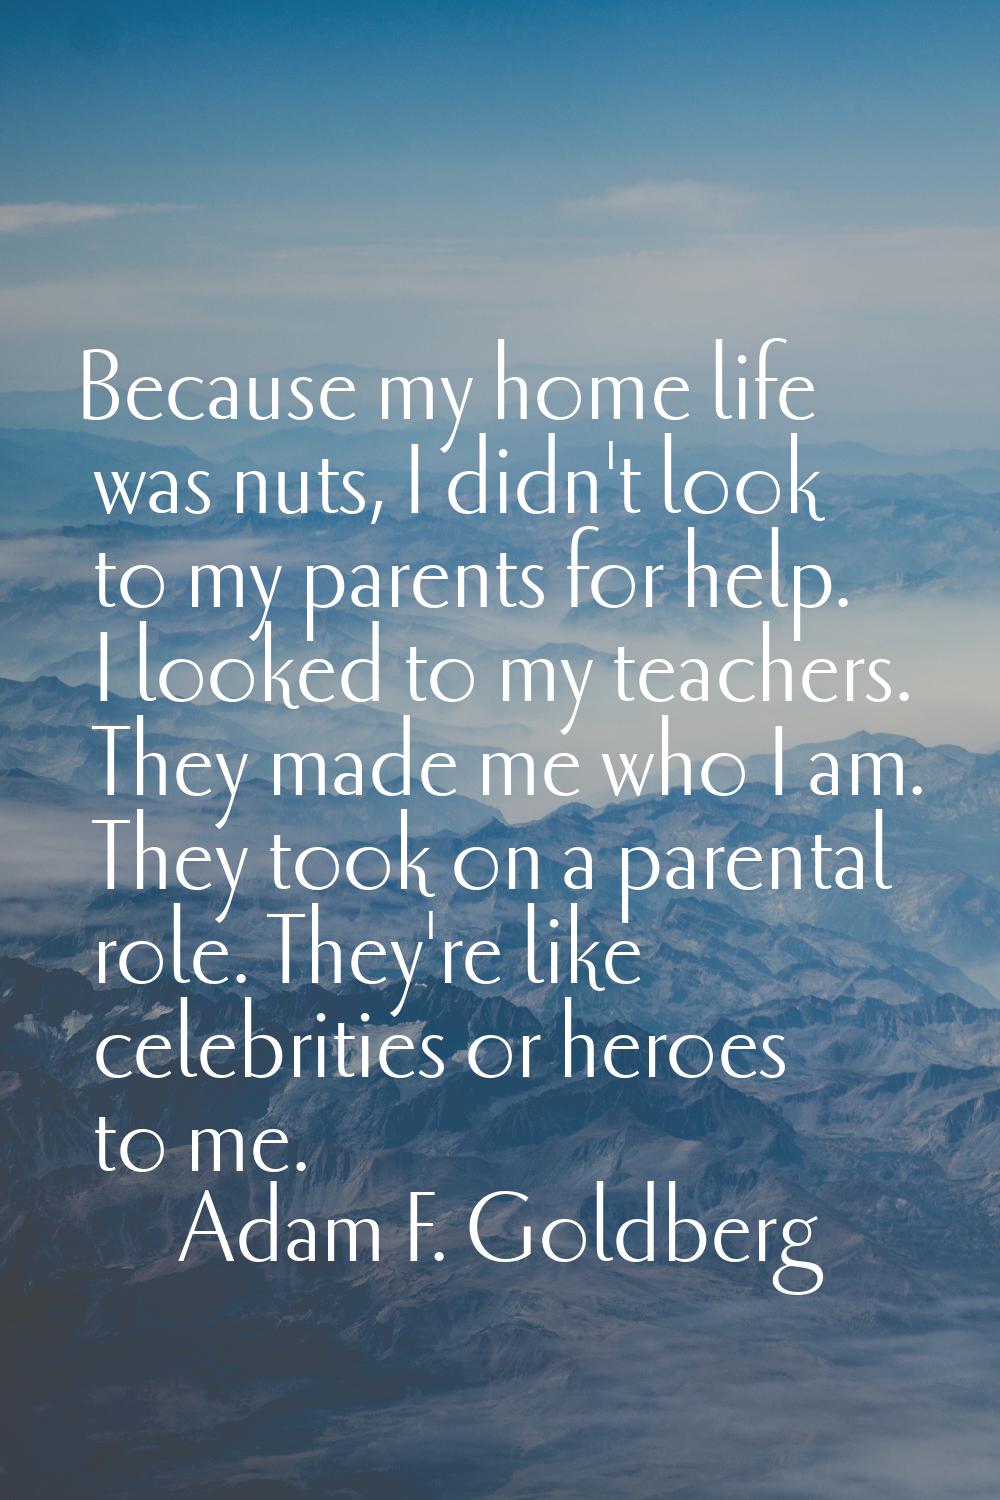 Because my home life was nuts, I didn't look to my parents for help. I looked to my teachers. They 